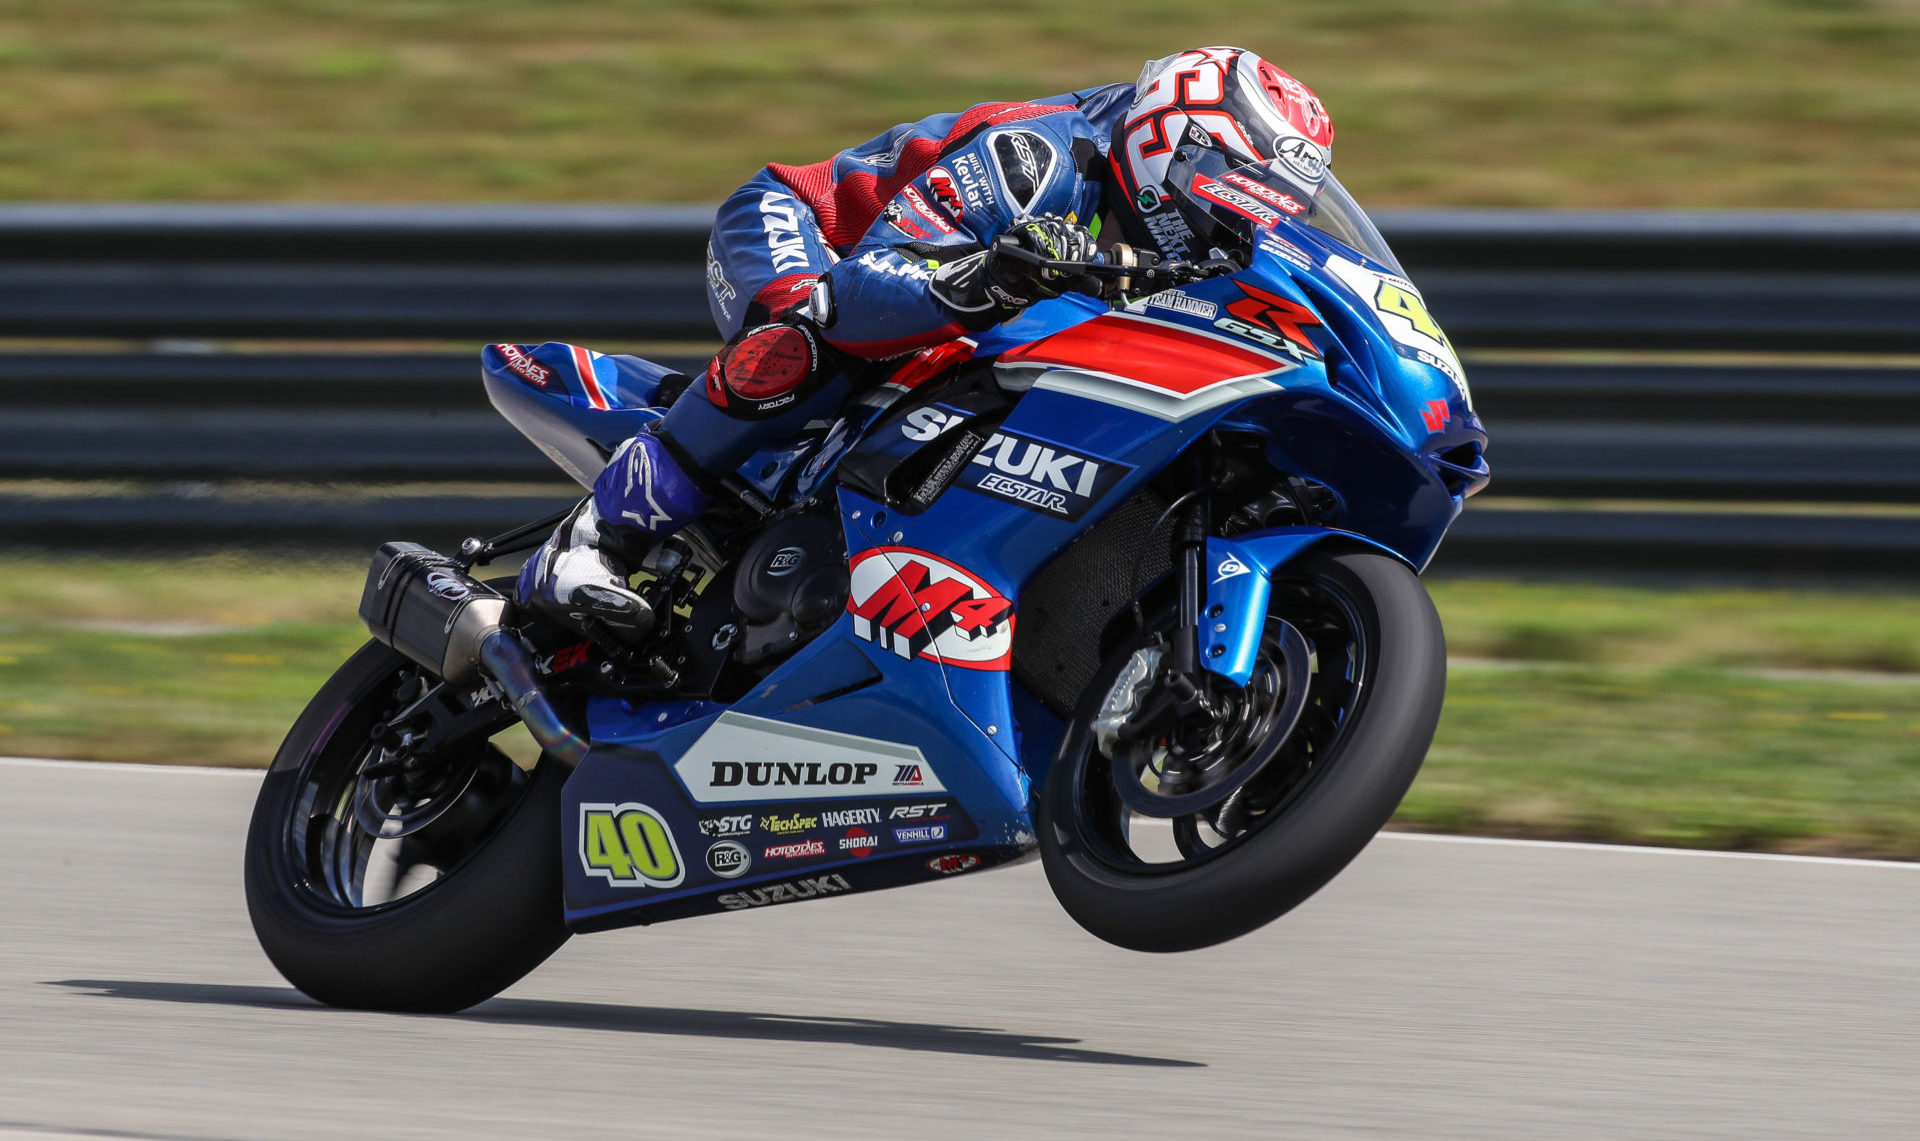 Sean Dylan Kelly (40) executed an impressive last-lap pass for the win on his Suzuki GSX-R600. Photo by Brian J. Nelson, courtesy Suzuki Motor USA, LLC.